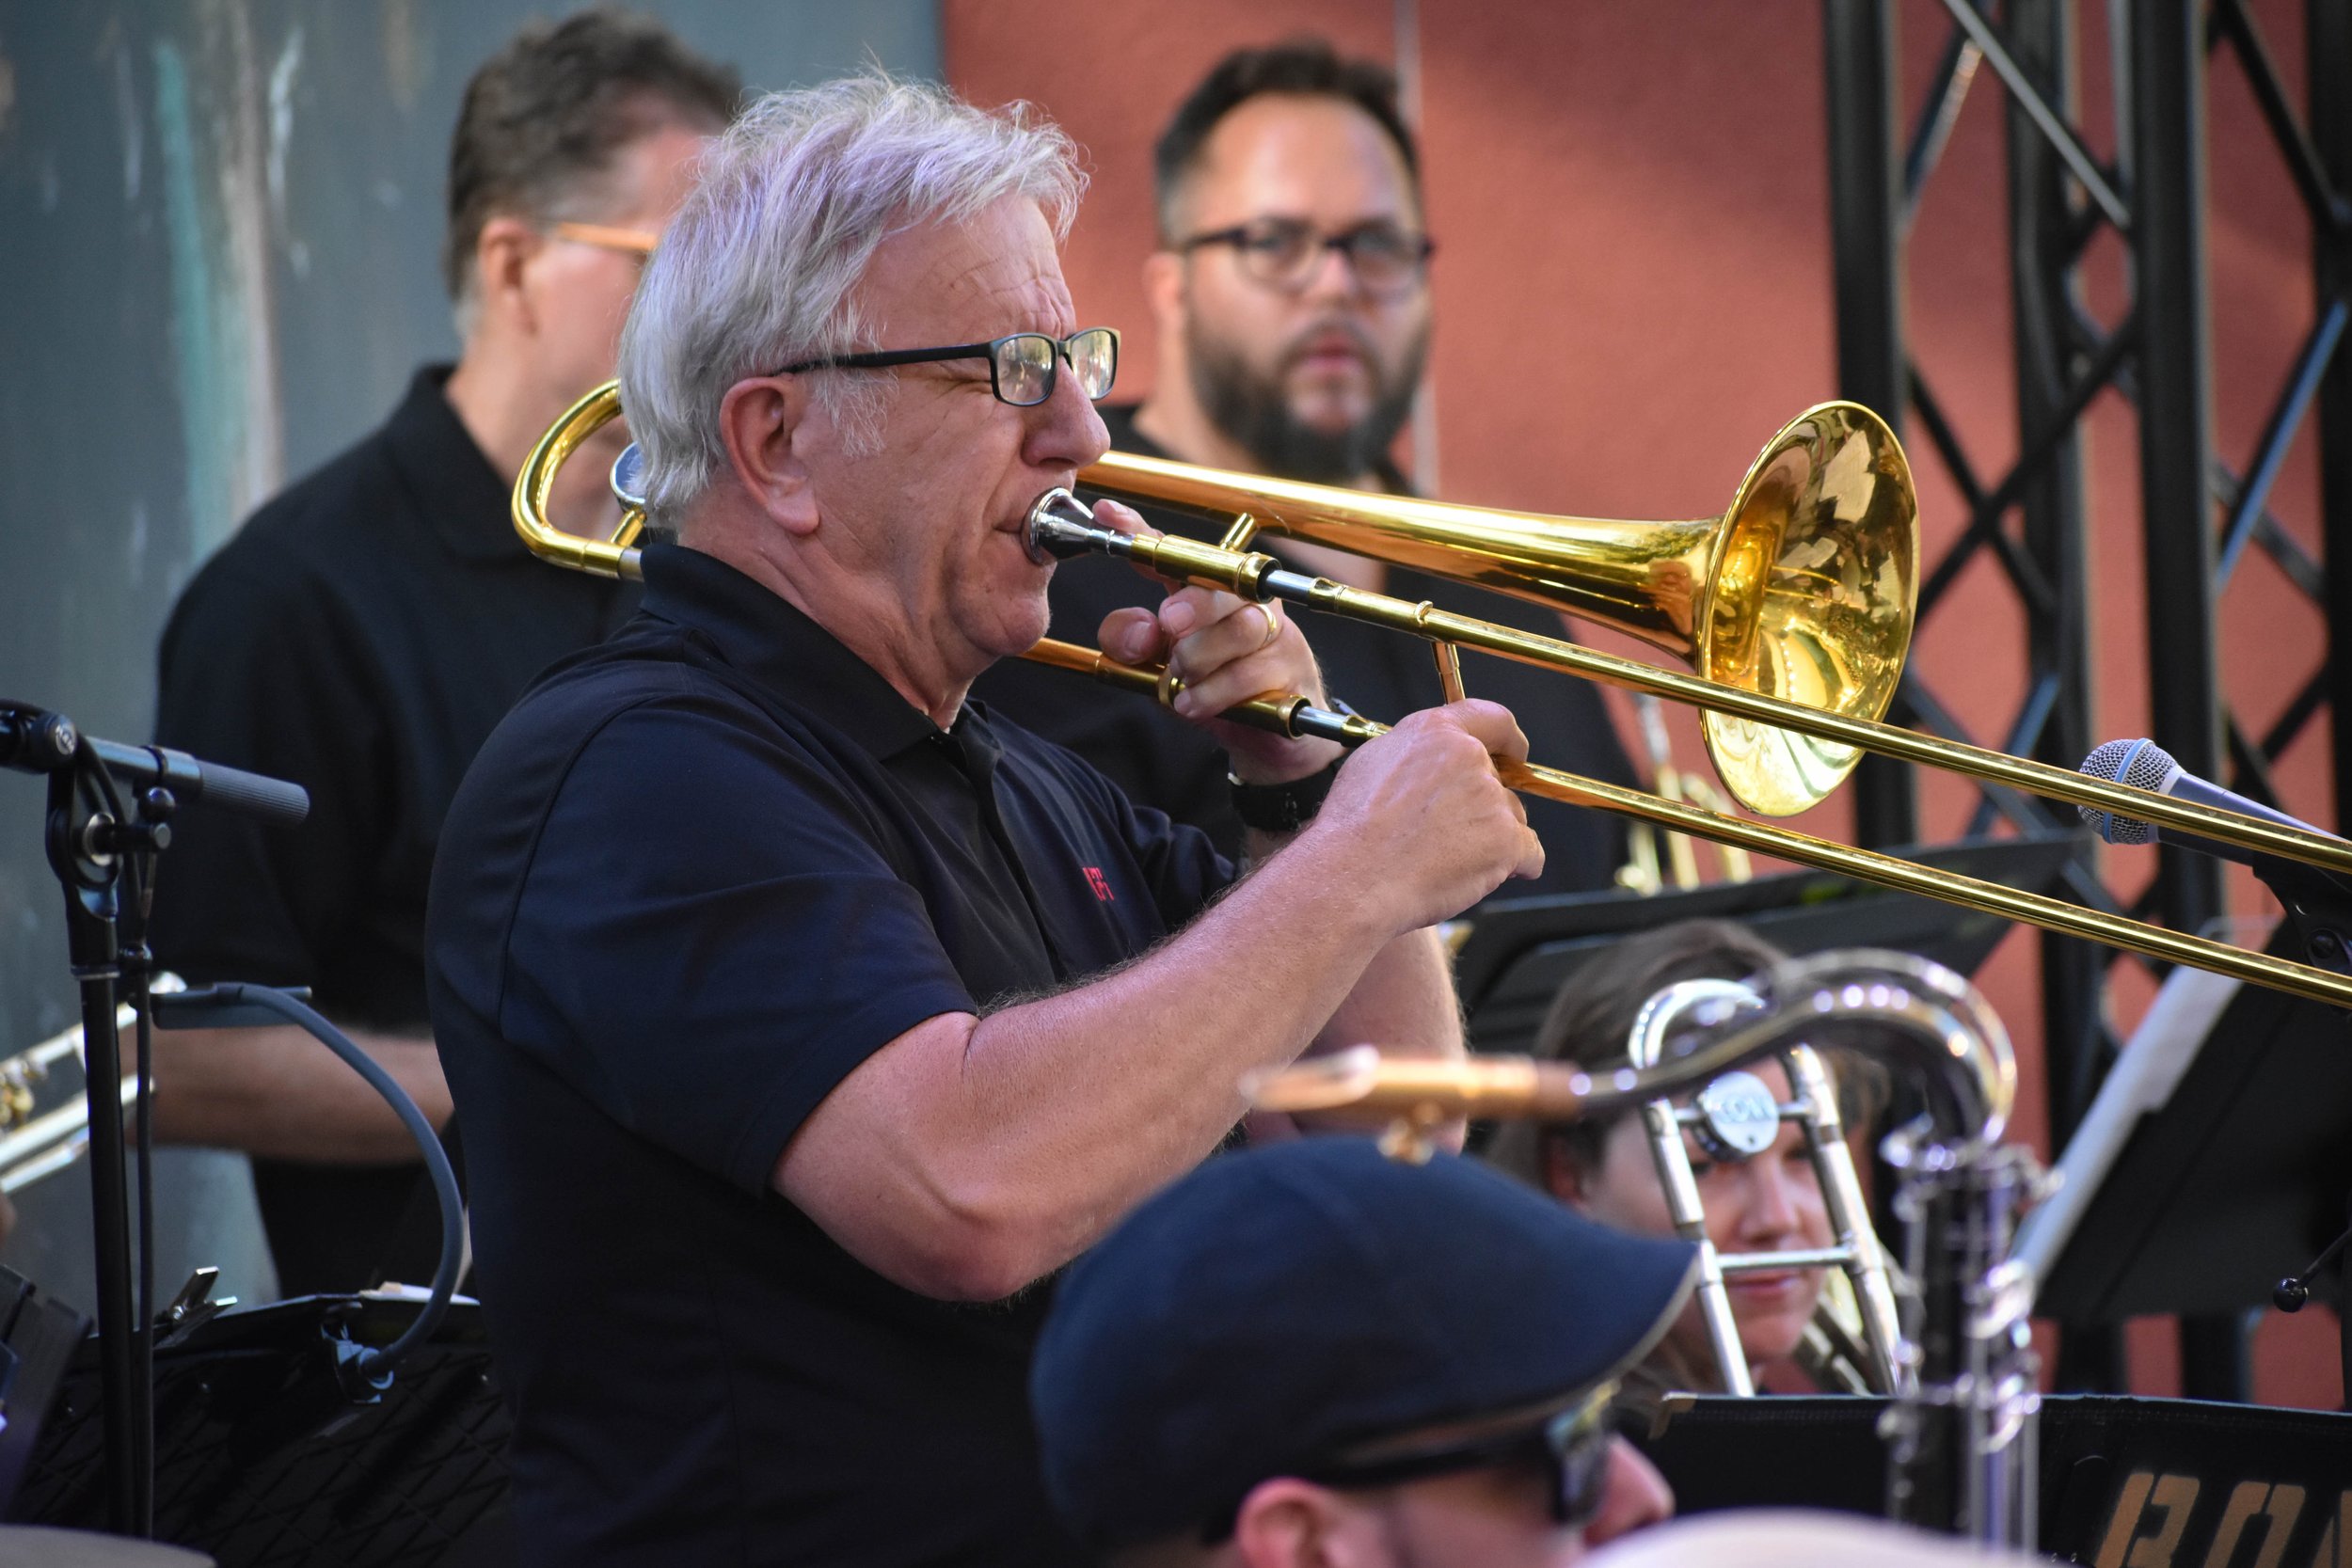 07-10-2023 Laguna Jazz Band concert at Pageant of the Masters by Peyton Webster82-63.jpg